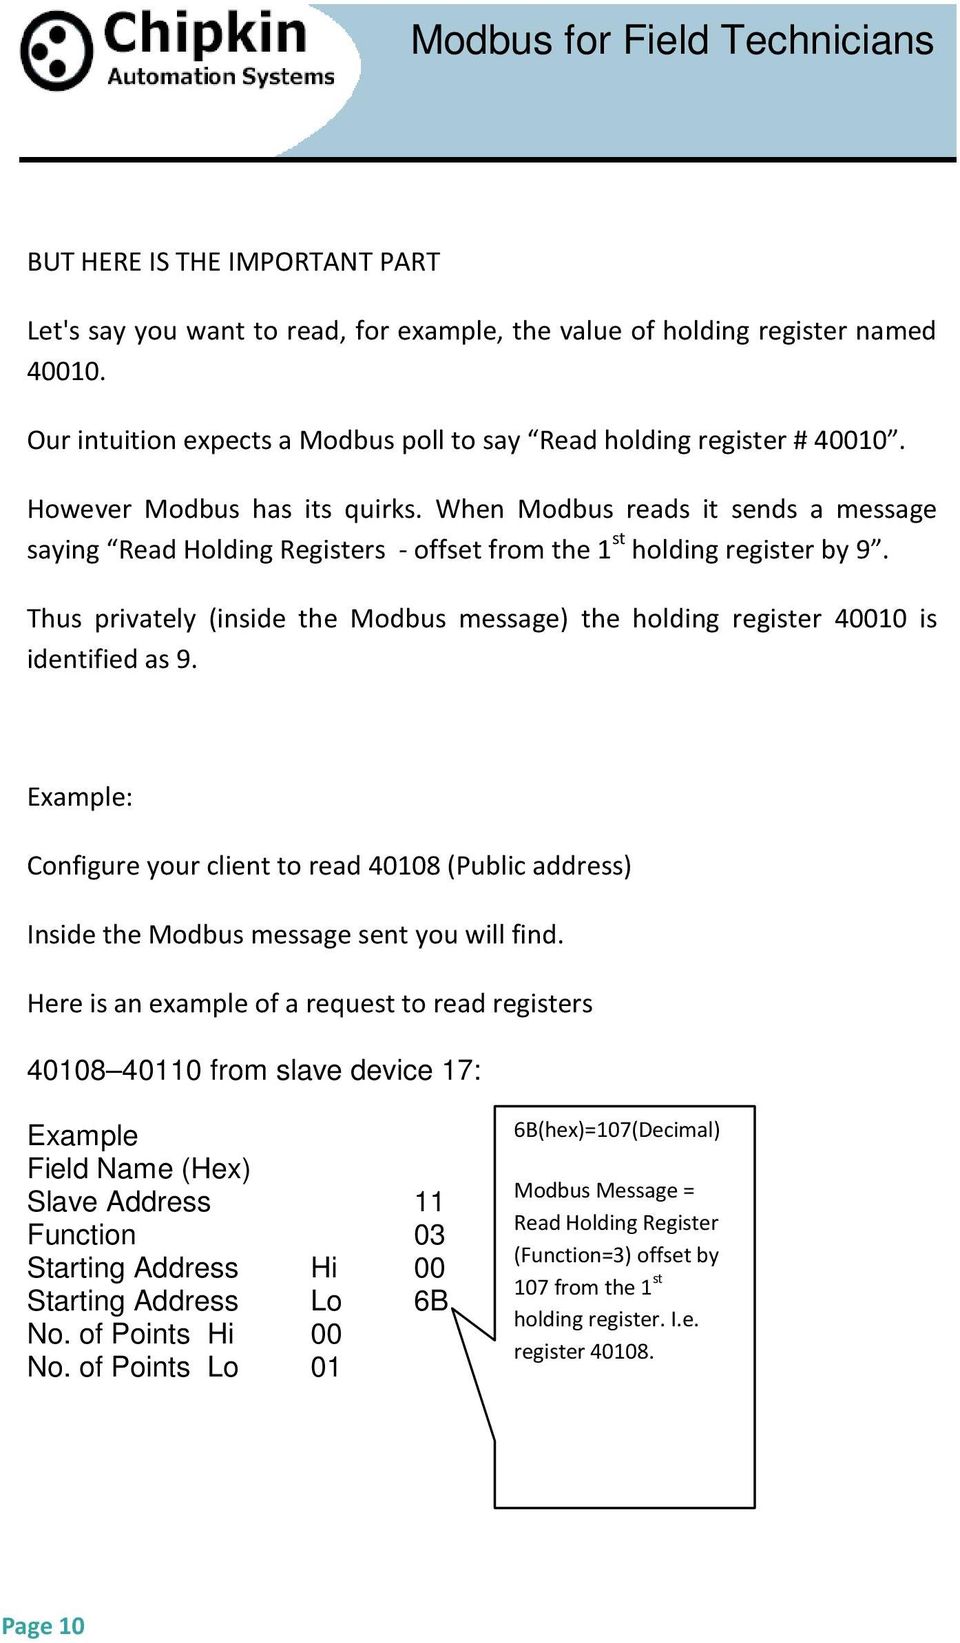 Thus privately (inside the Modbus message) the holding register 40010 is identified as 9. Example: Configure your client to read 40108 (Public address) Inside the Modbus message sent you will find.